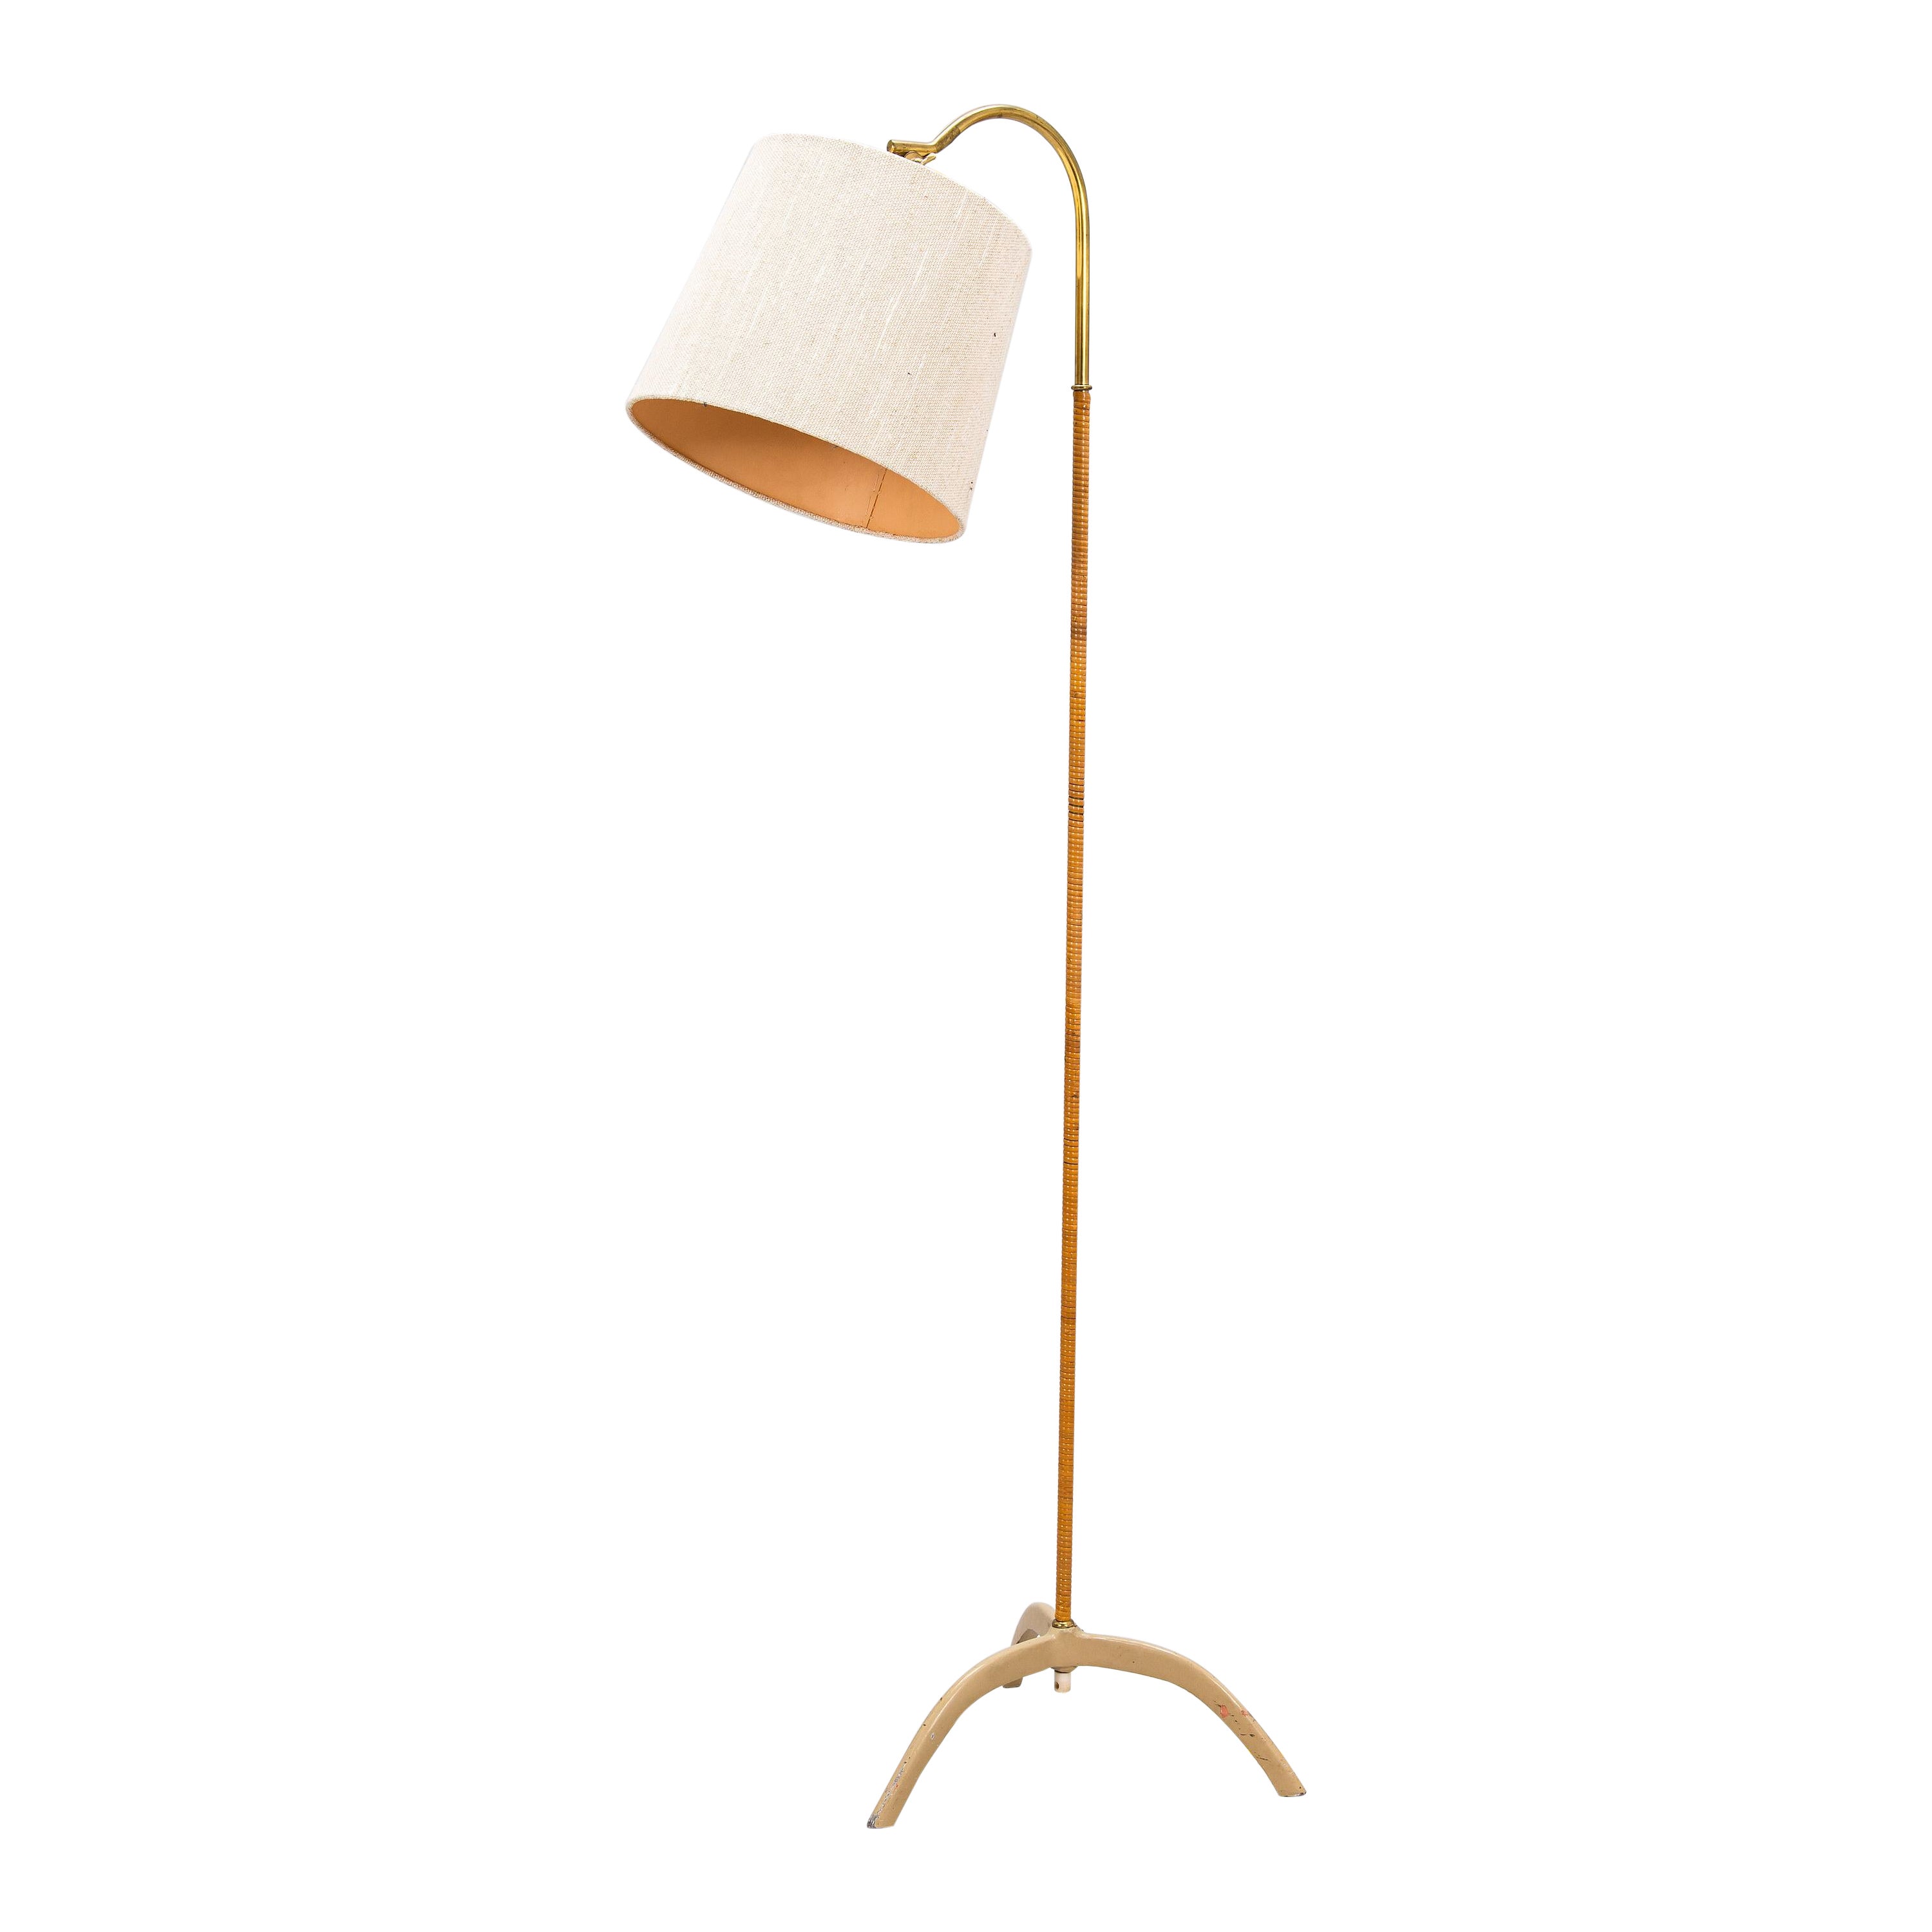 Paavo Tynell "9609" Floor Lamp in Brass Produced by Taito Oy, Finland, 1940s